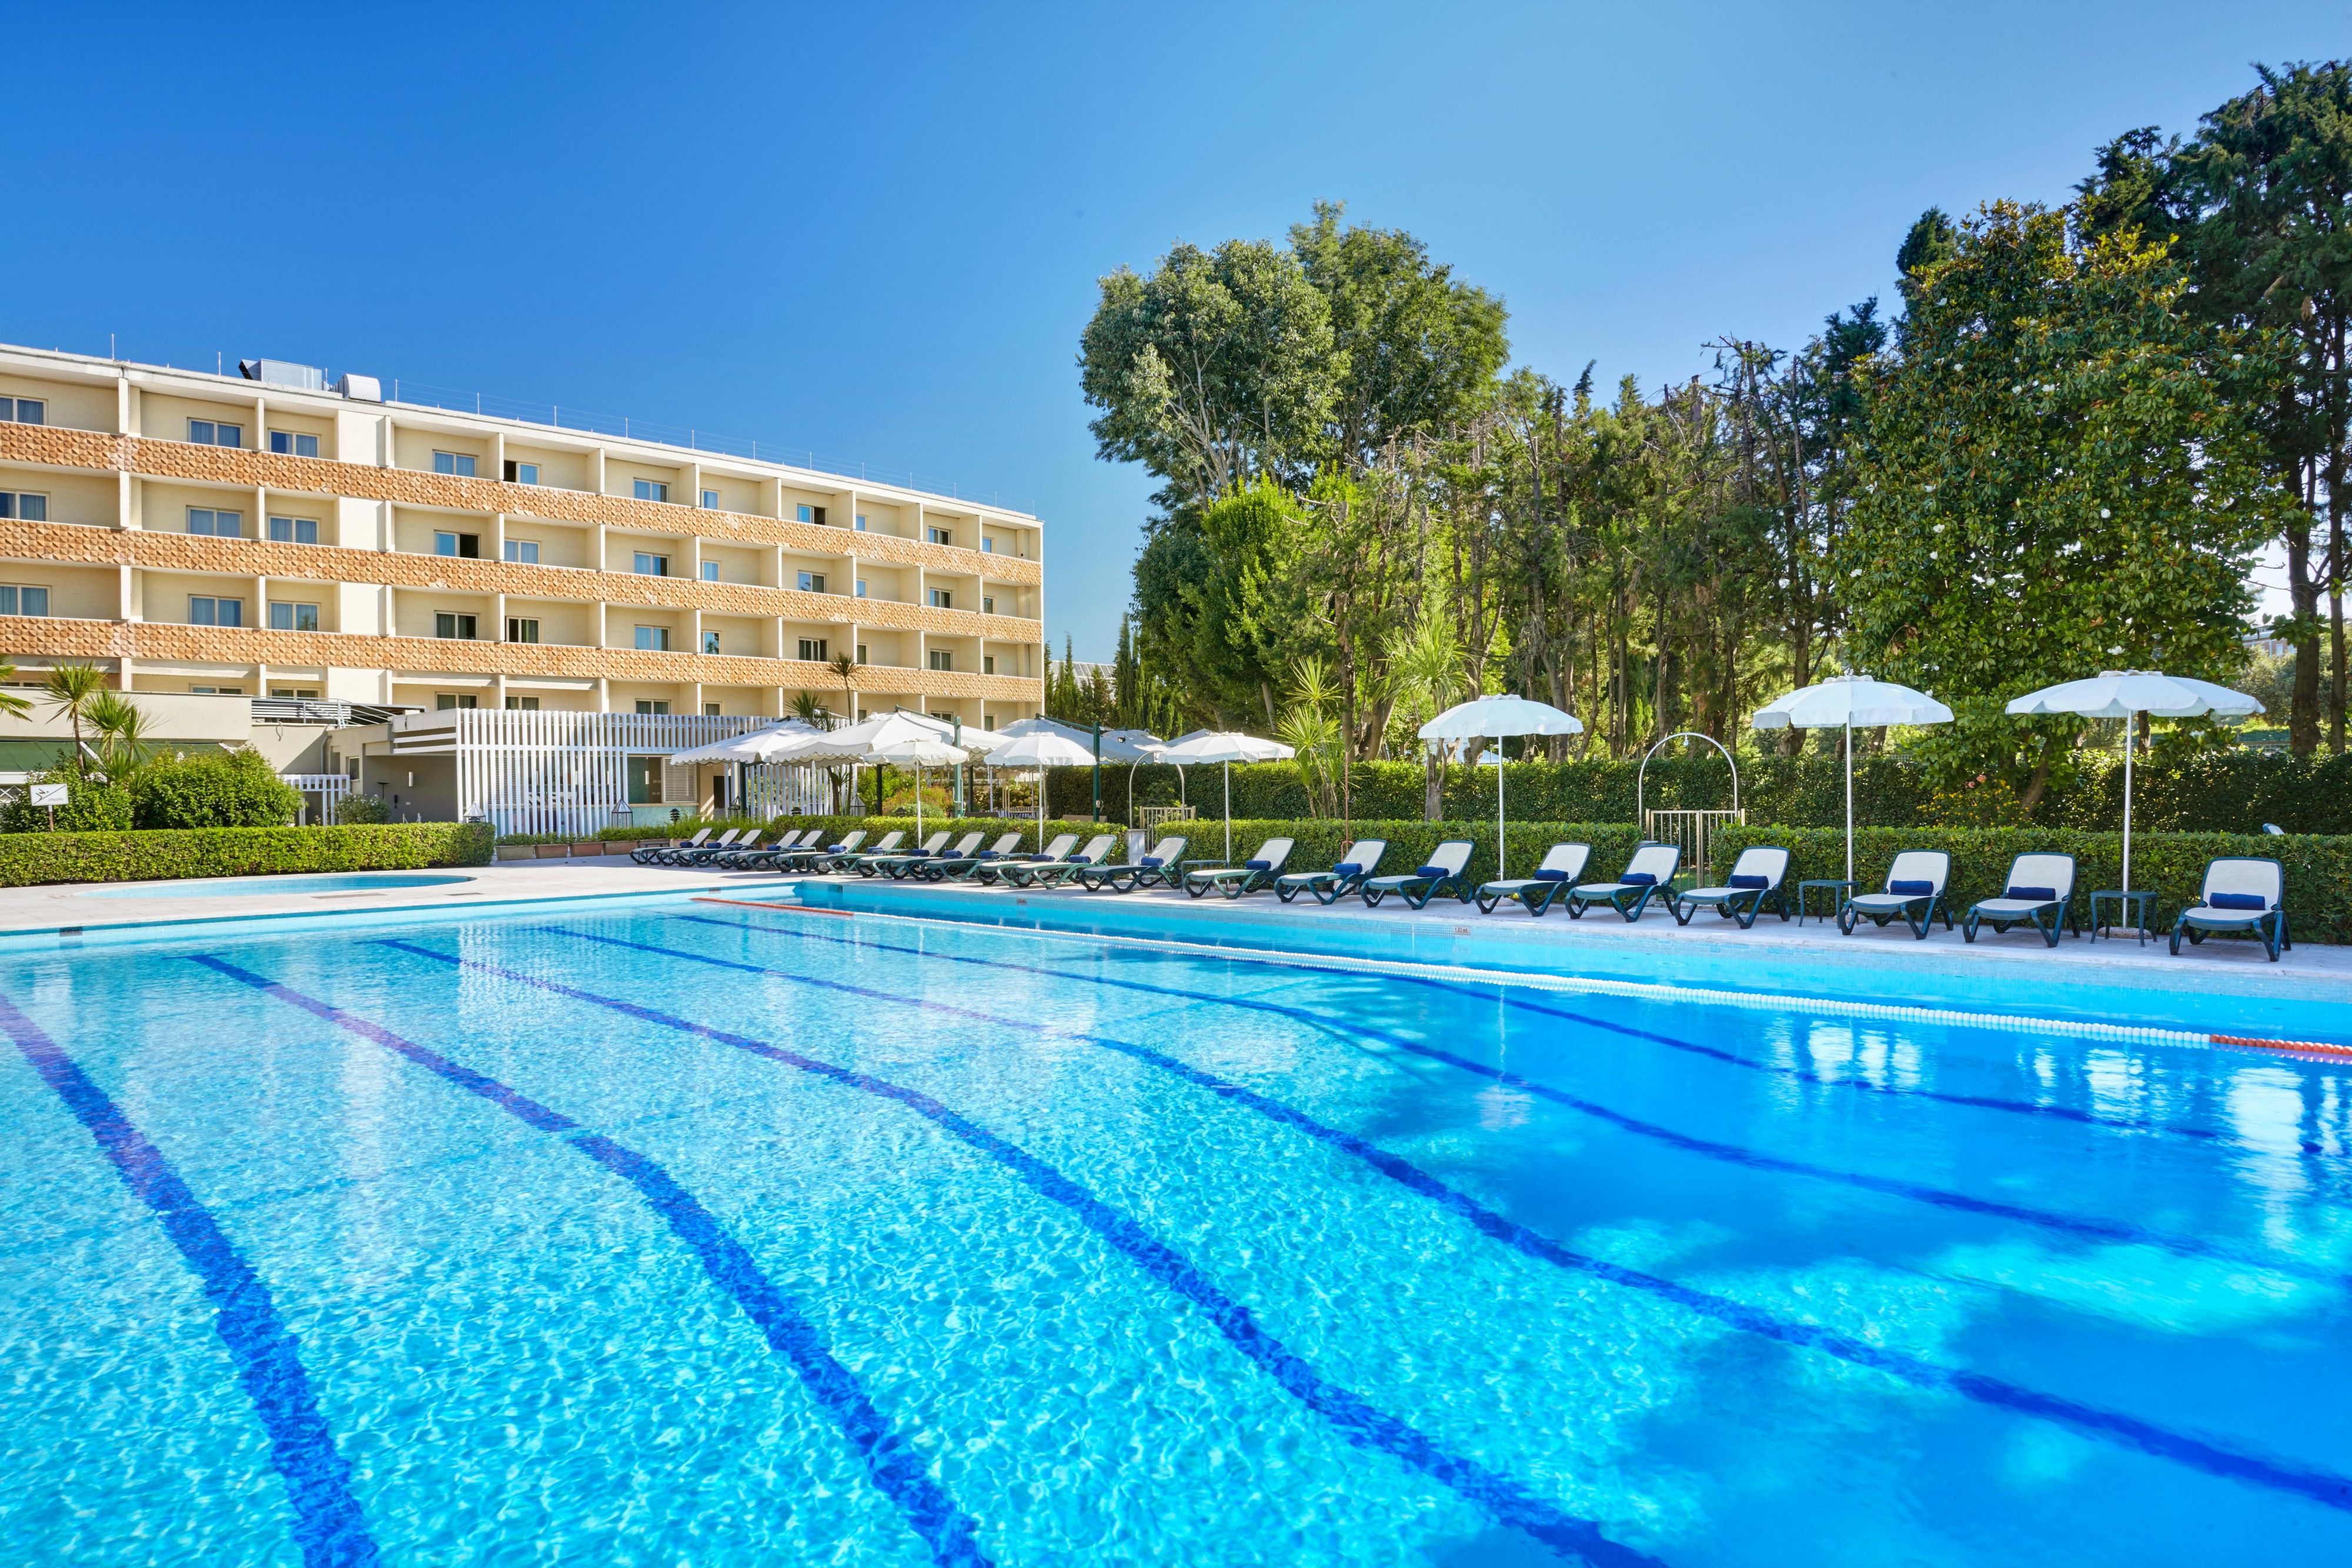 During summer season relax and enjoy in our swimming pool